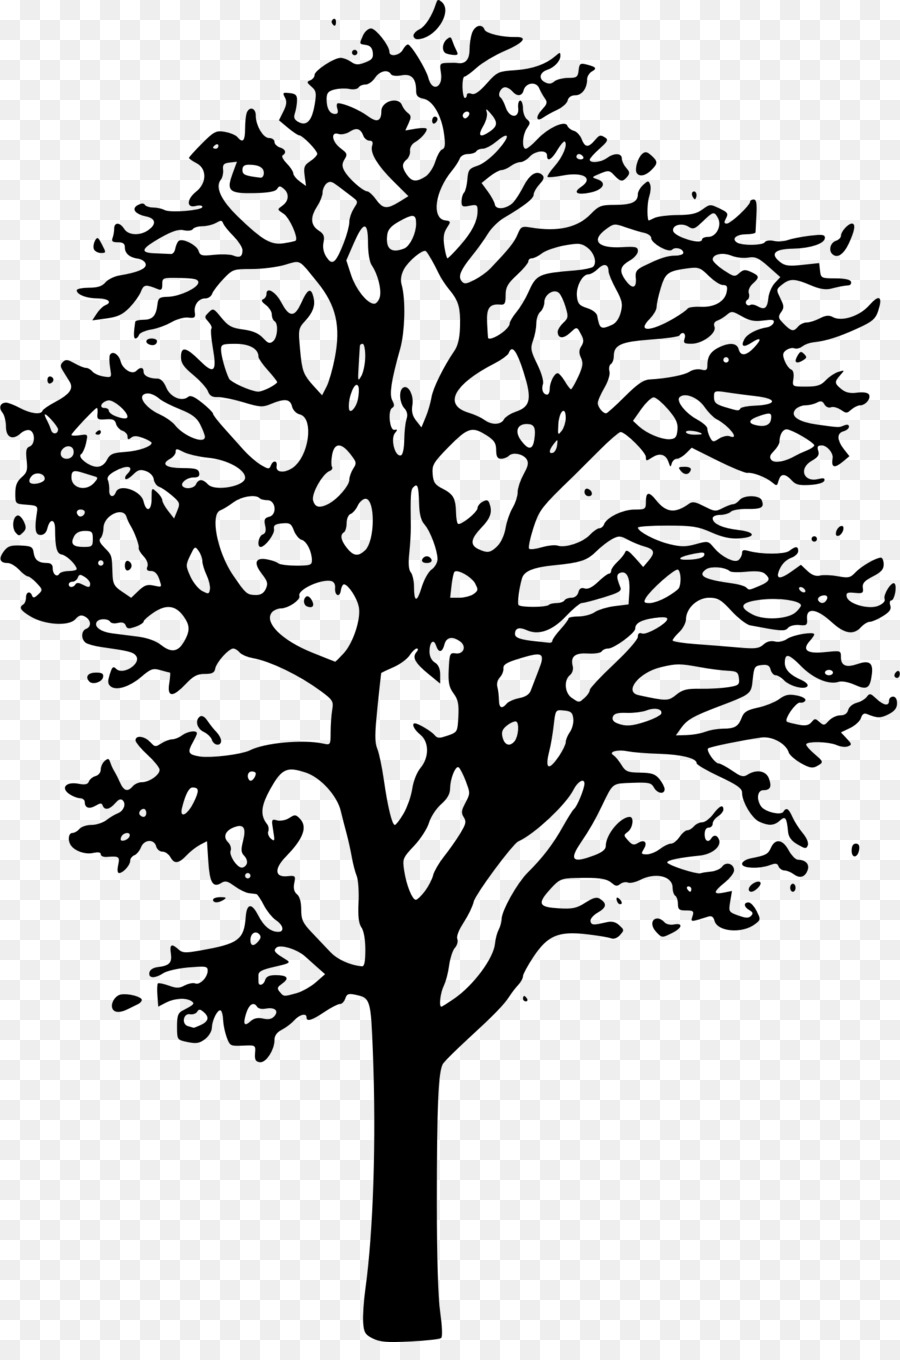 Japanese maple Tree Clip art - willow vector png download - 1610*2400 - Free Transparent Japanese Maple png Download.